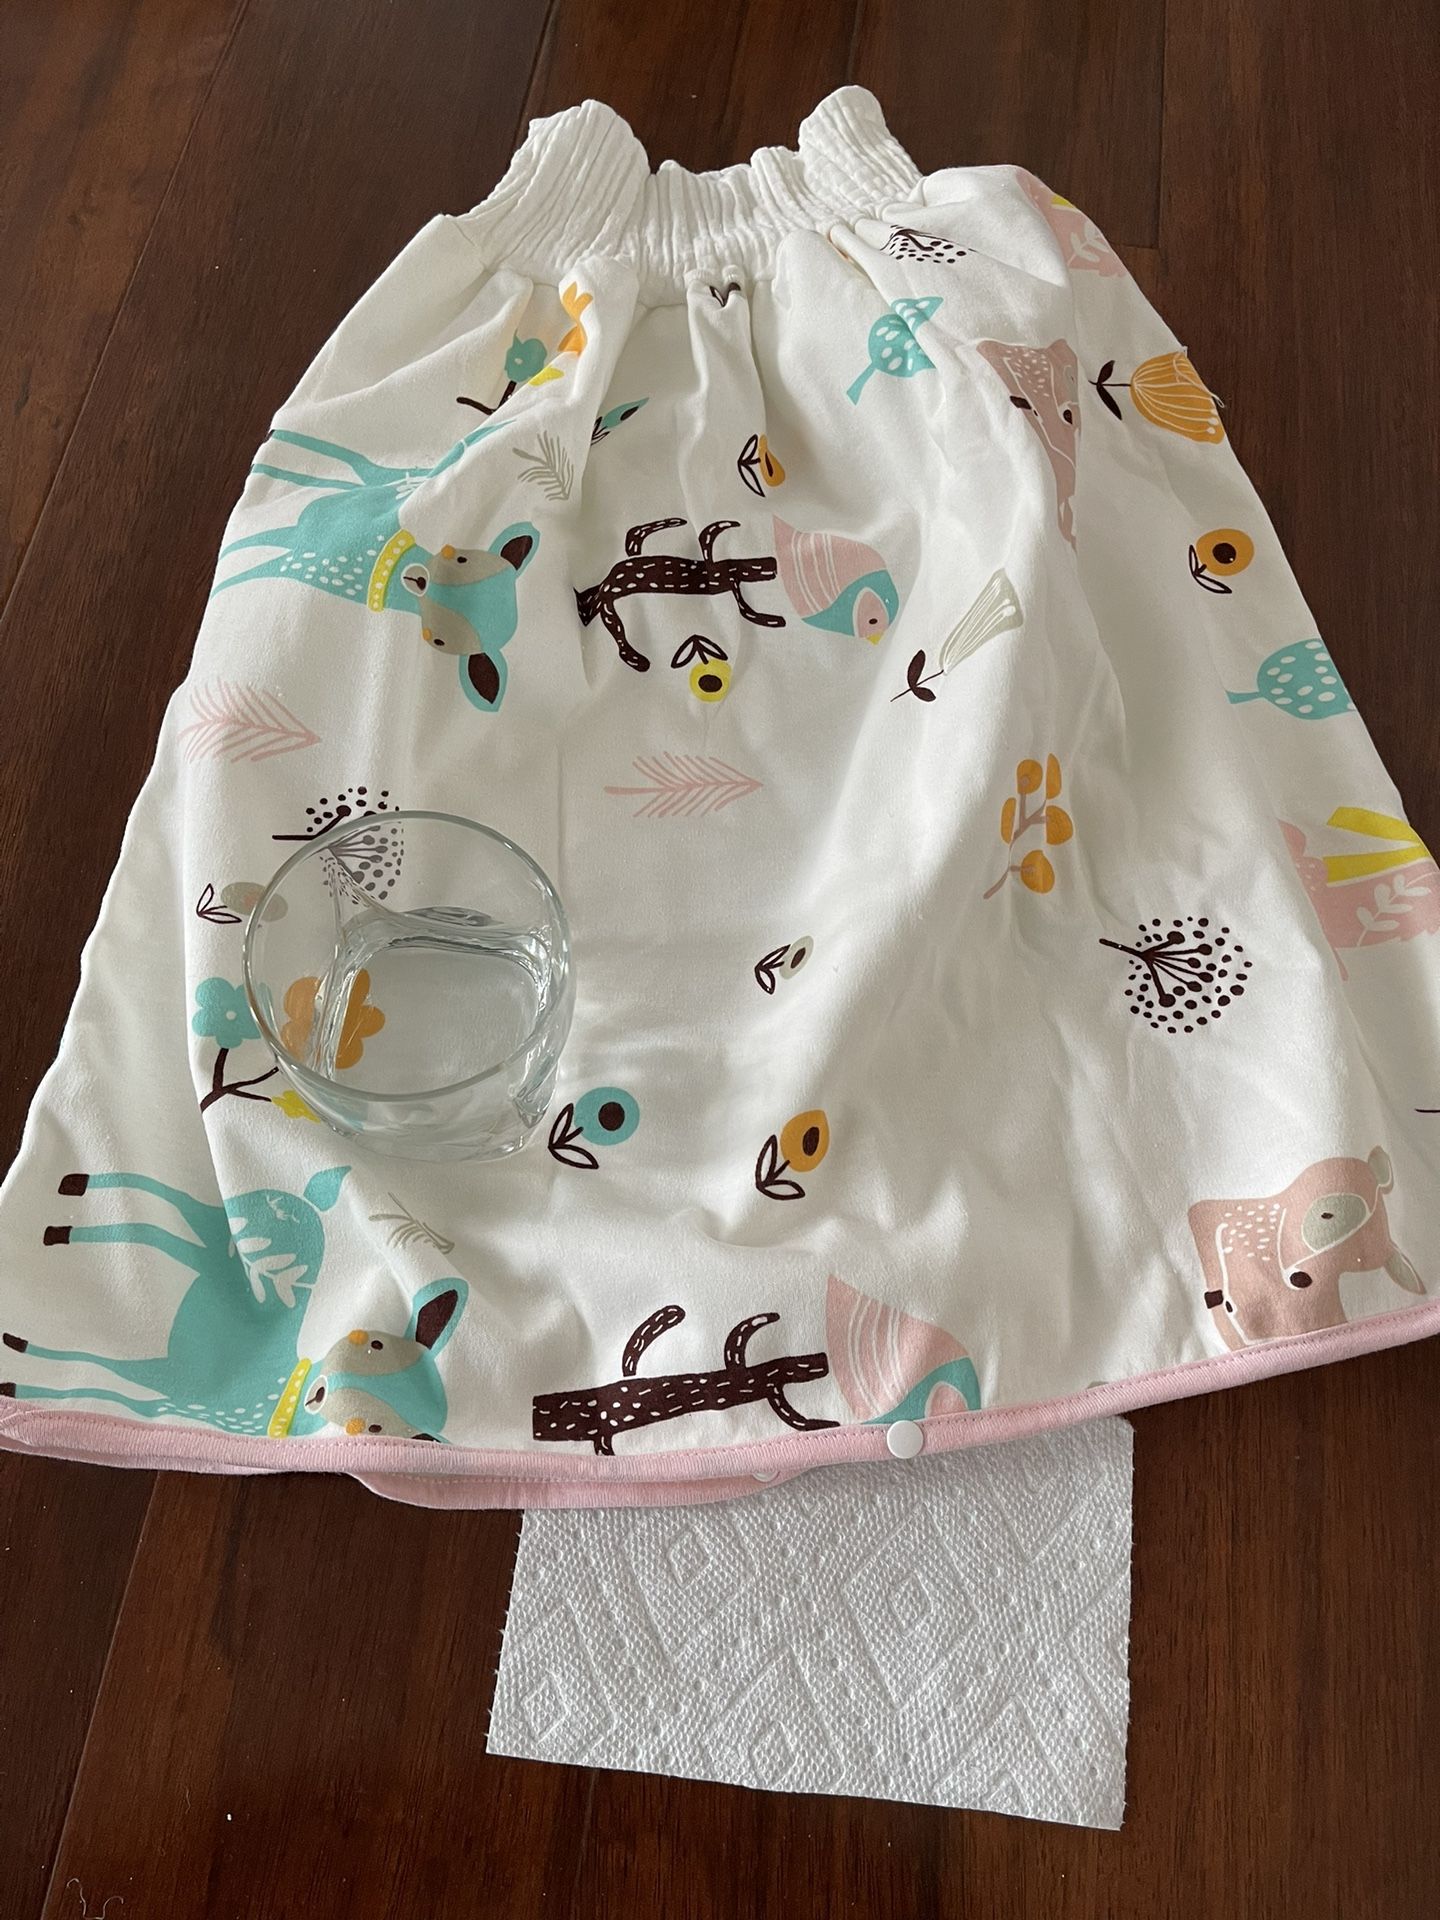 adults diaper skirt. washable size s